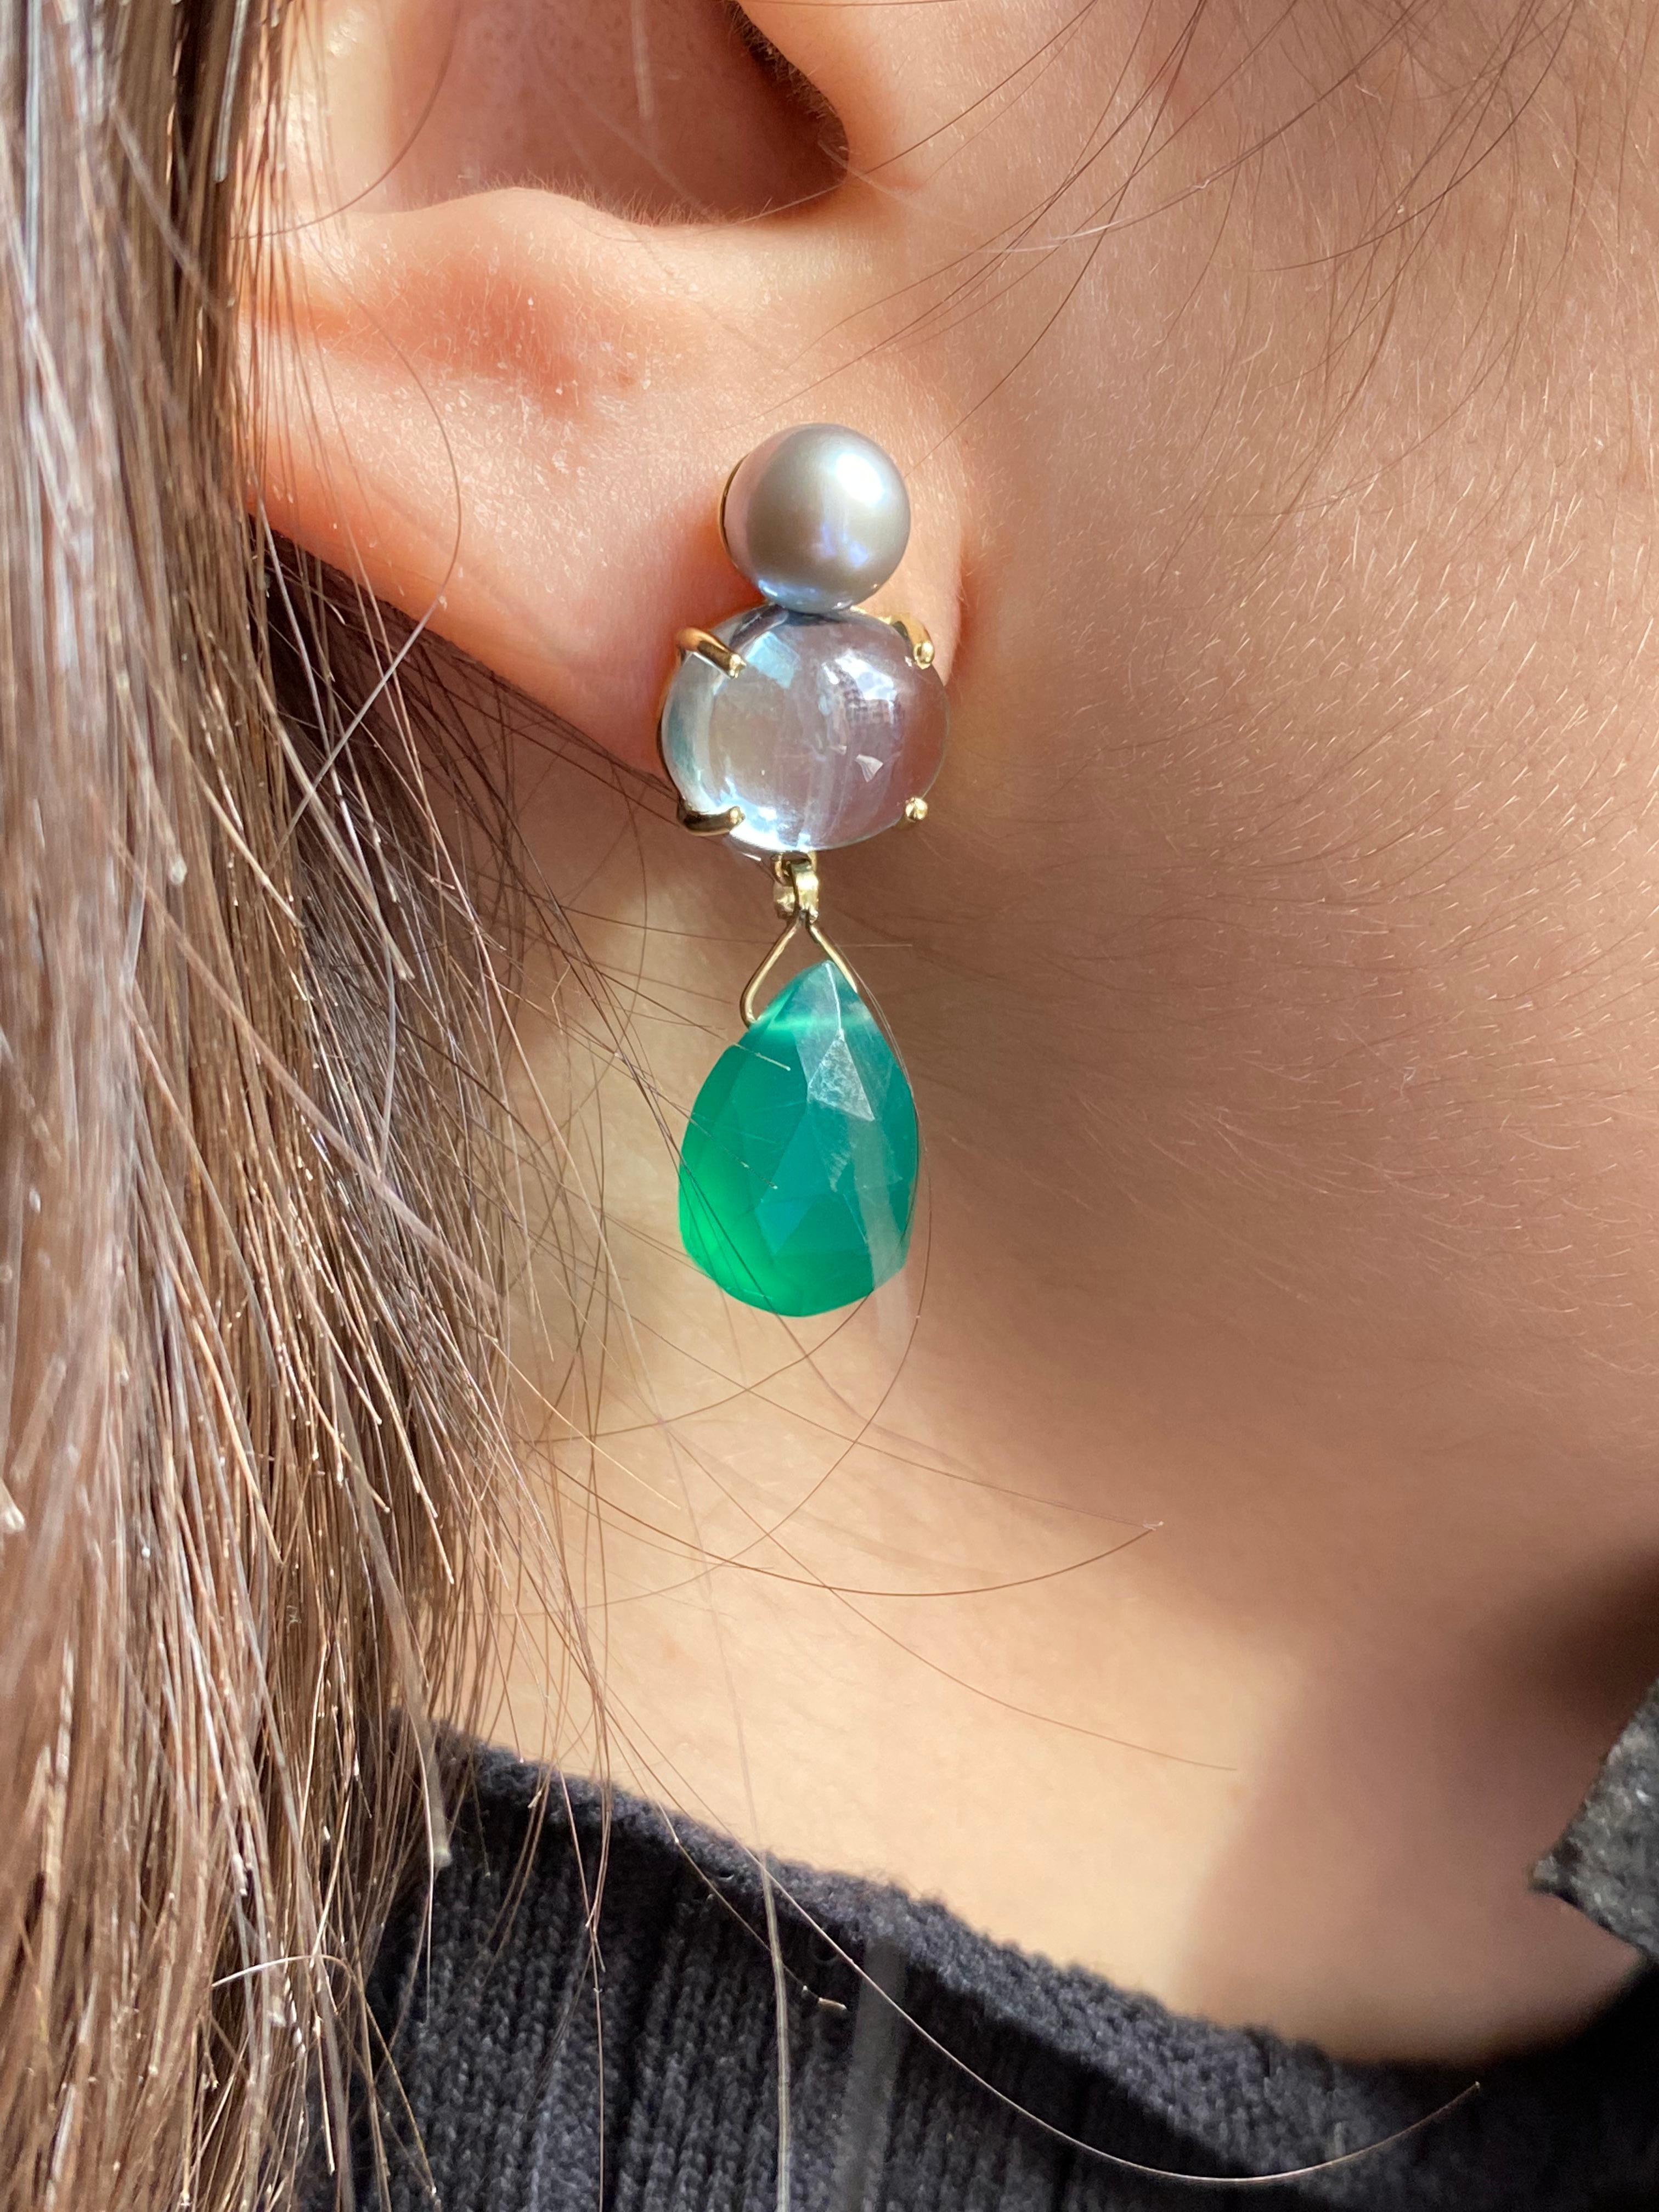 Experience the allure of Rossella Ugolini's Design Collection, where elegance meets nature's hues. Crafted in 18 Karat Yellow Gold, these earrings showcase a serene light blue and green palette with Light Blue Topaz and a deep green Agate.

The